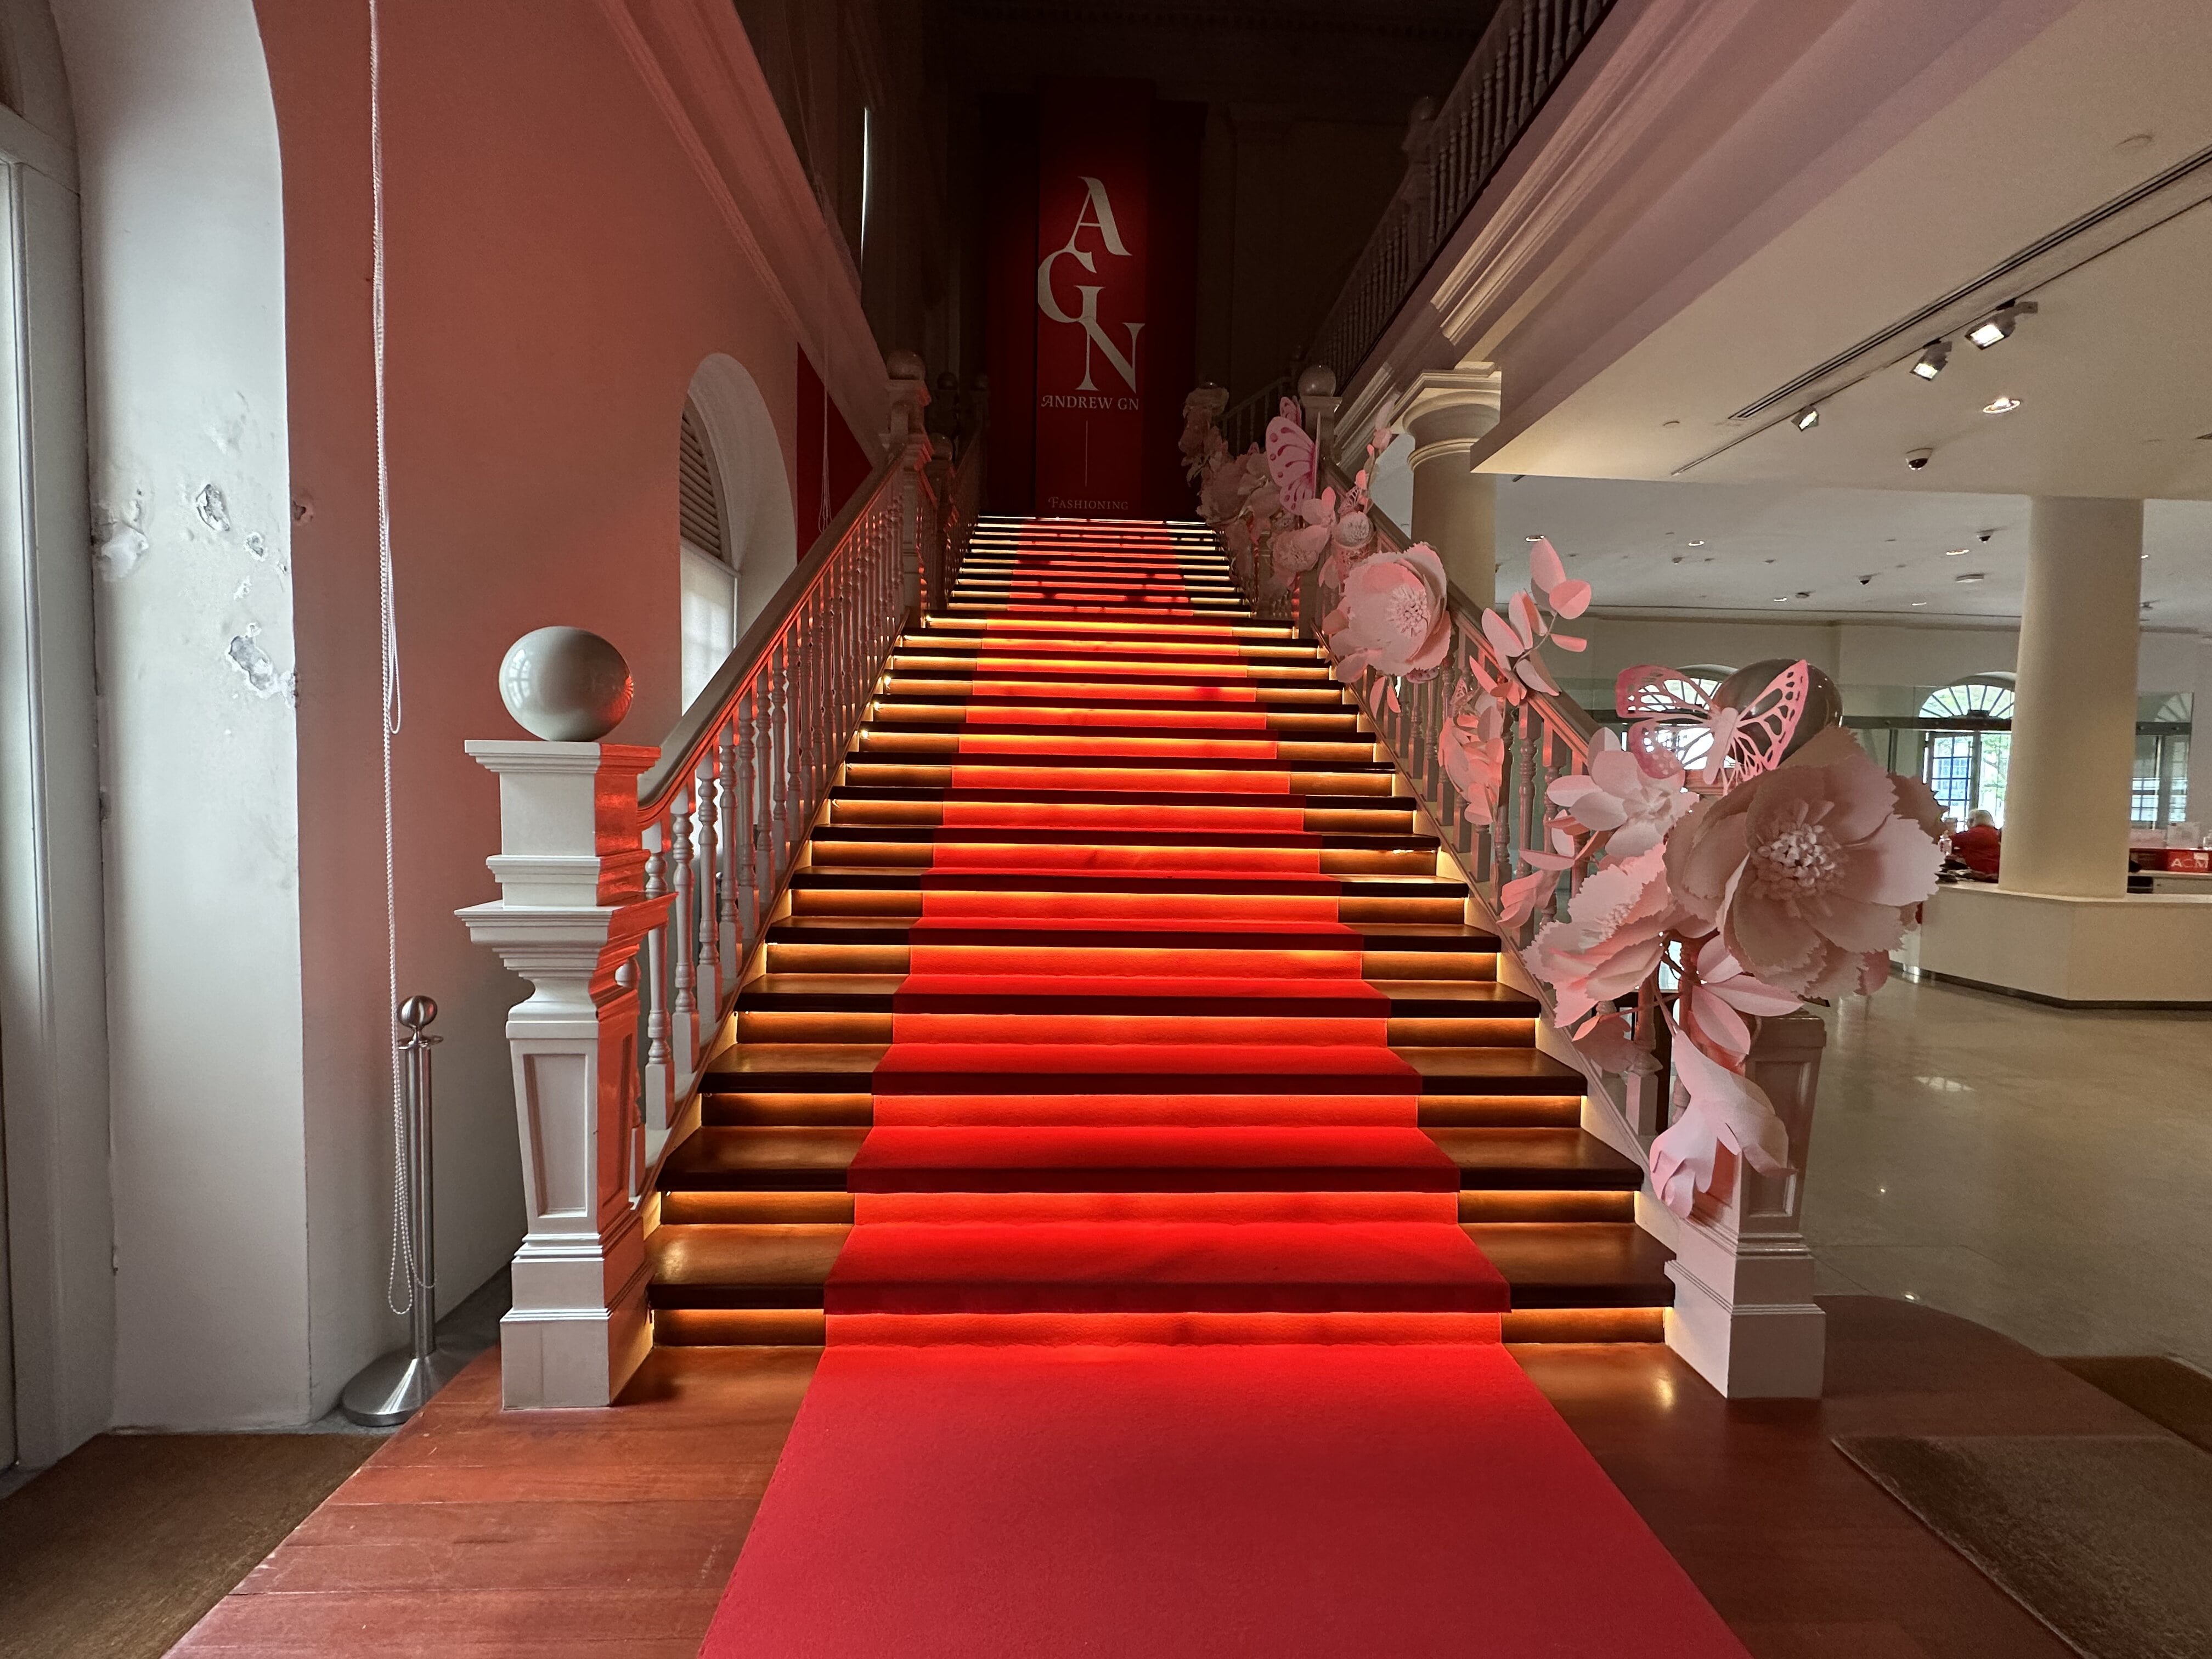  Wide shot of a red carpeted staircase leading up towards the Andrew Gn exhibition